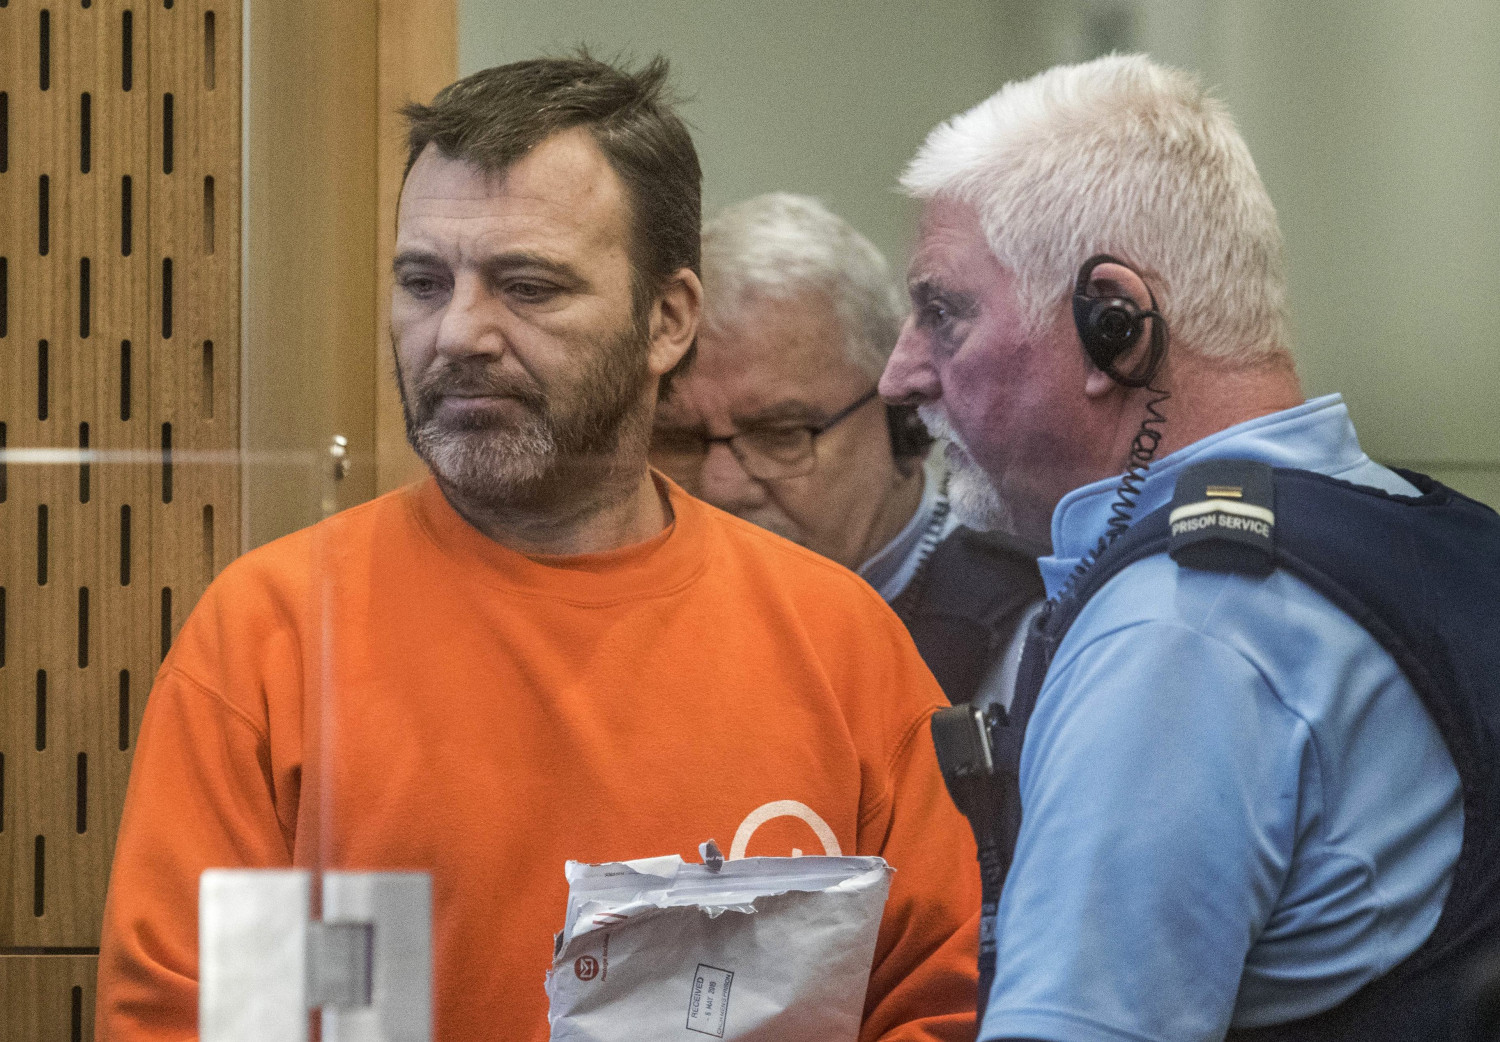 New Zealand Man Jailed for Sharing Video of Mass Shooting